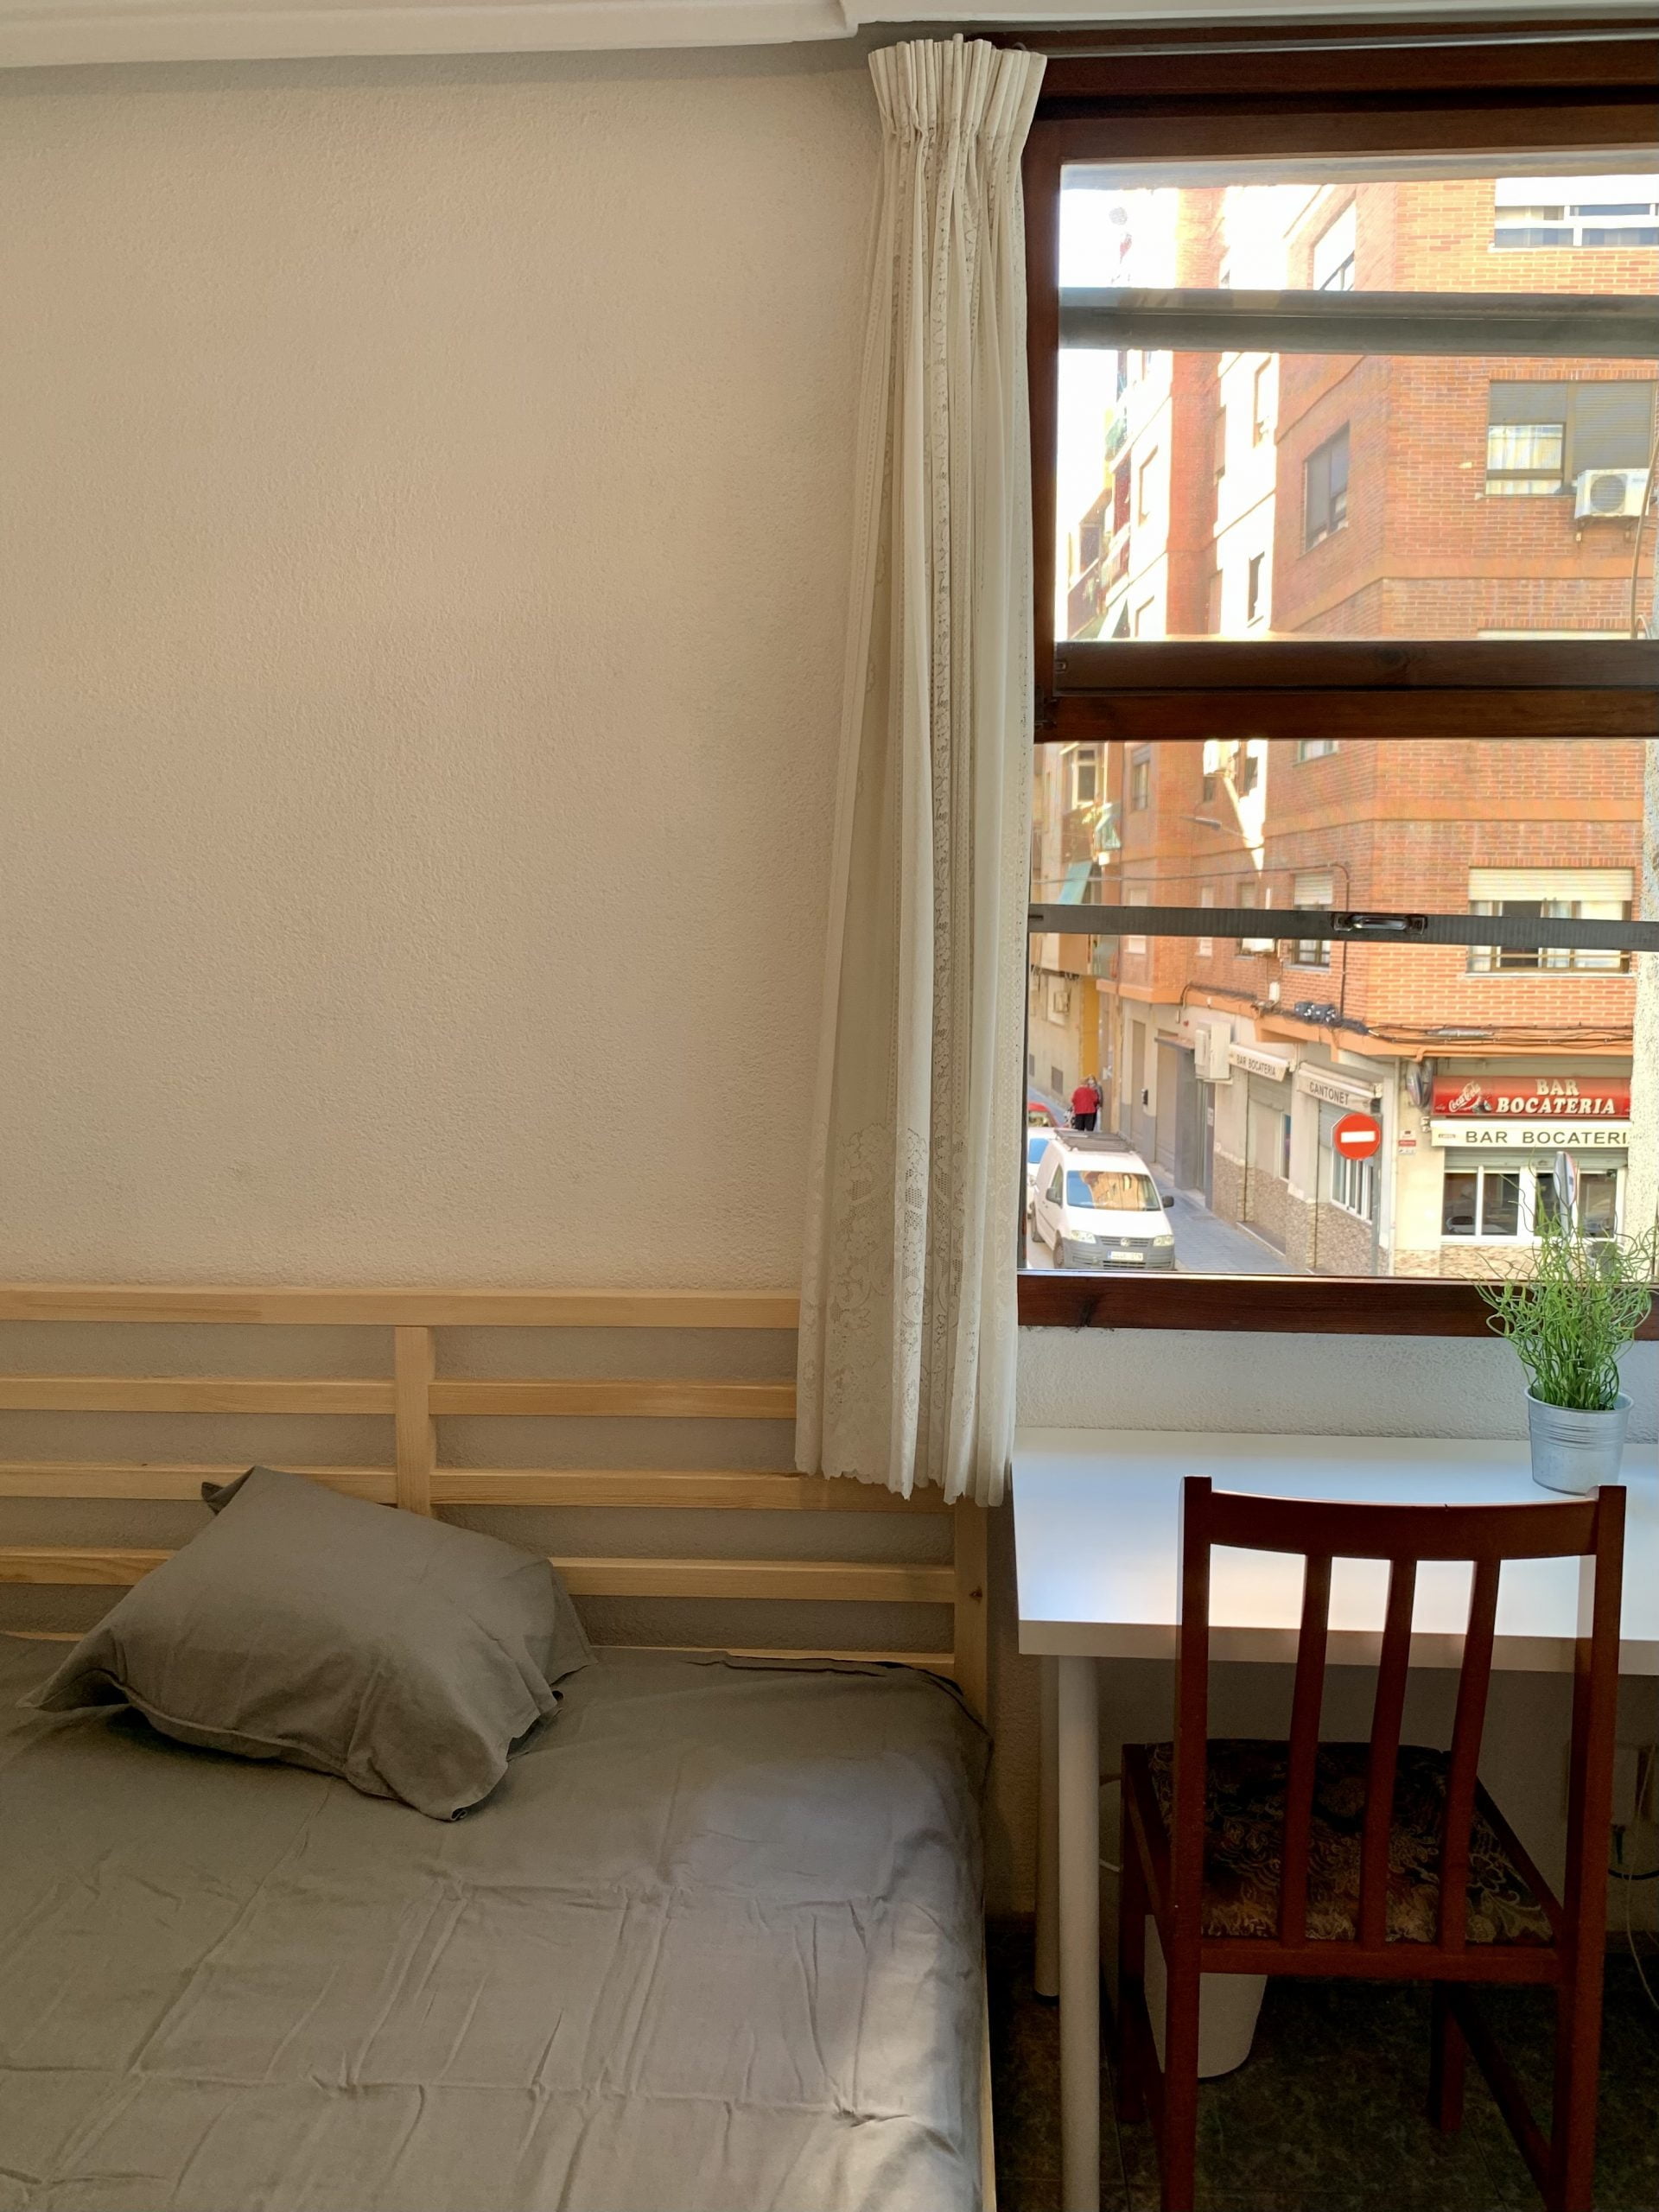 Mauri - Furnished apartment for students in Valencia